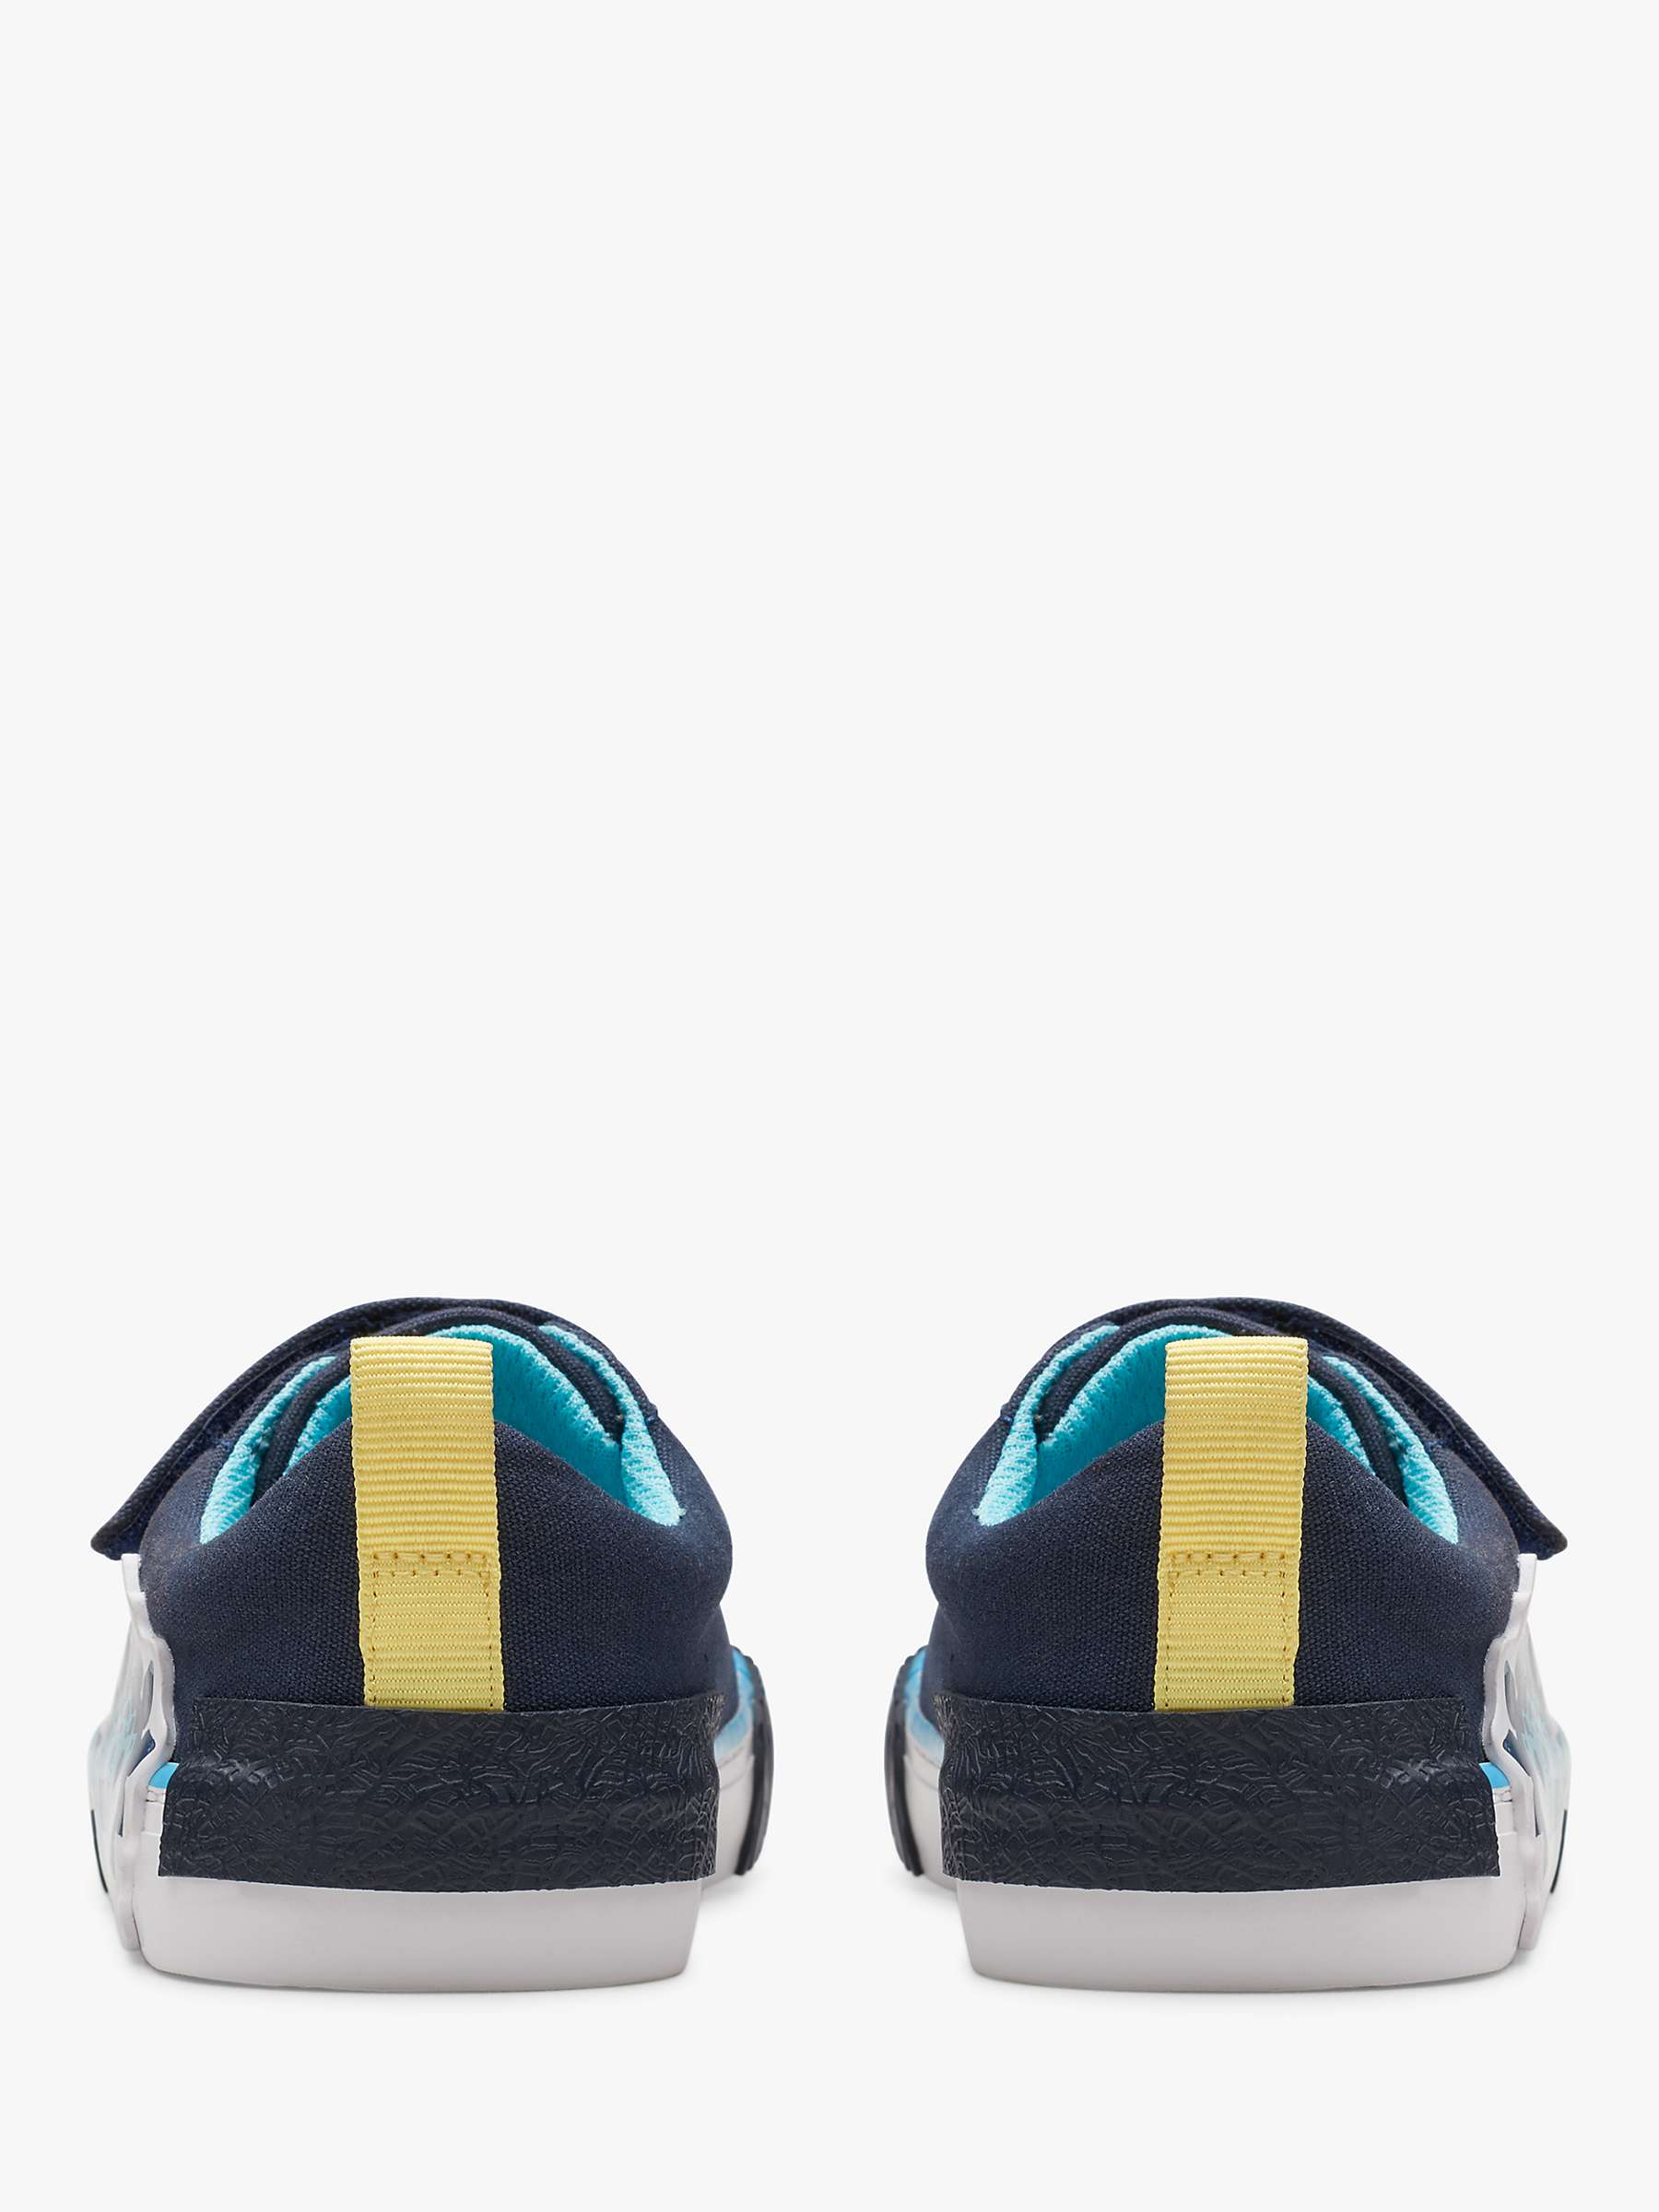 Buy Clarks Kids' Foxing Tail Dinosaur Trainers, Navy/Multi Online at johnlewis.com